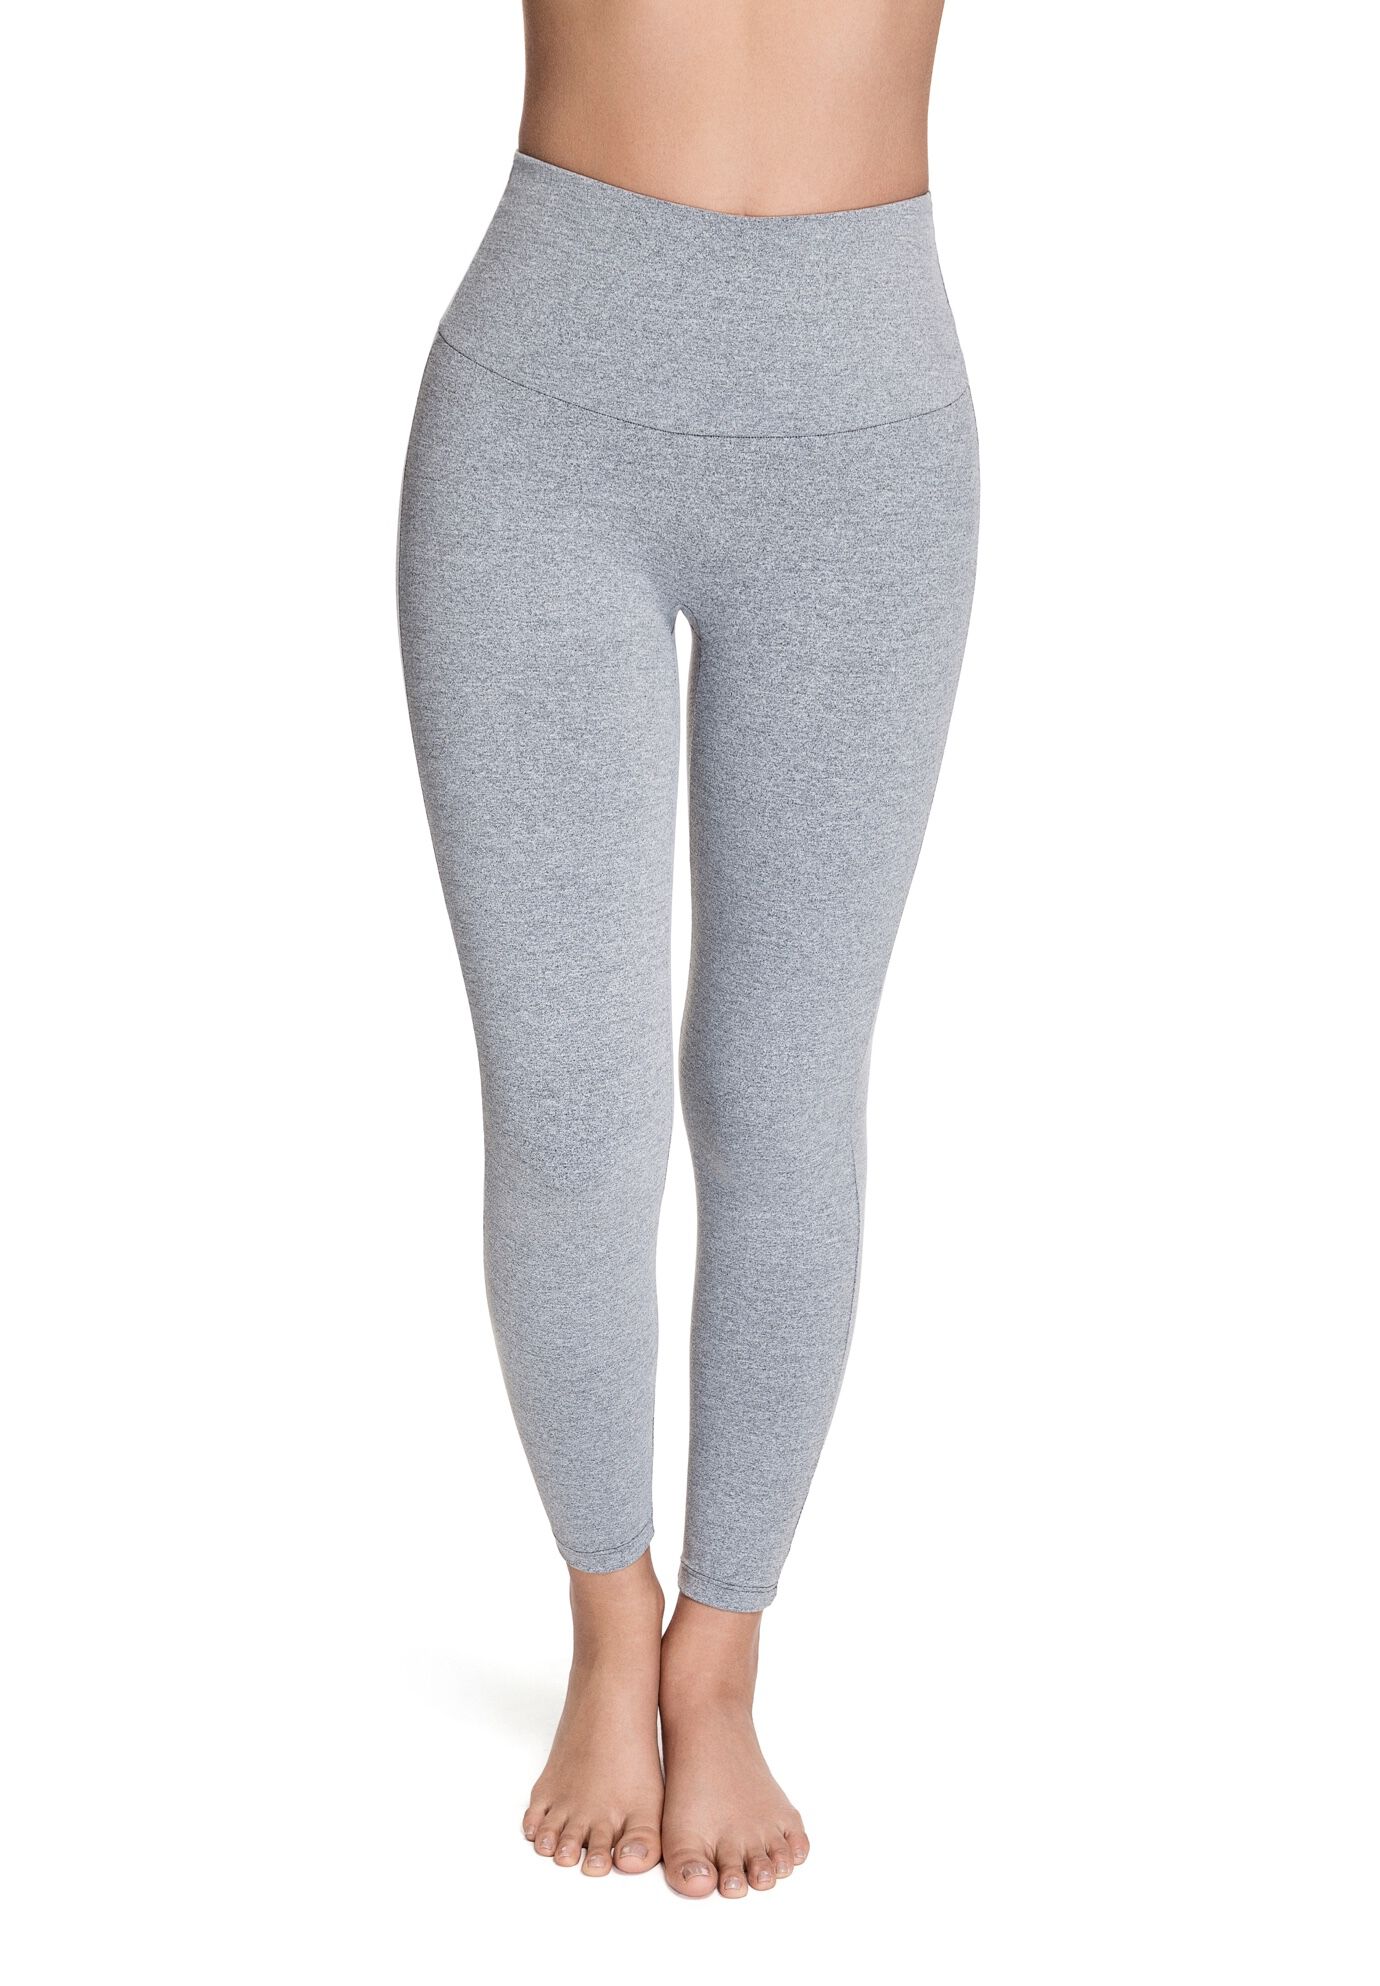 Plus Size Women's Bossa Essence High Rise Legging by Squeem in Heather Grey (Size M)